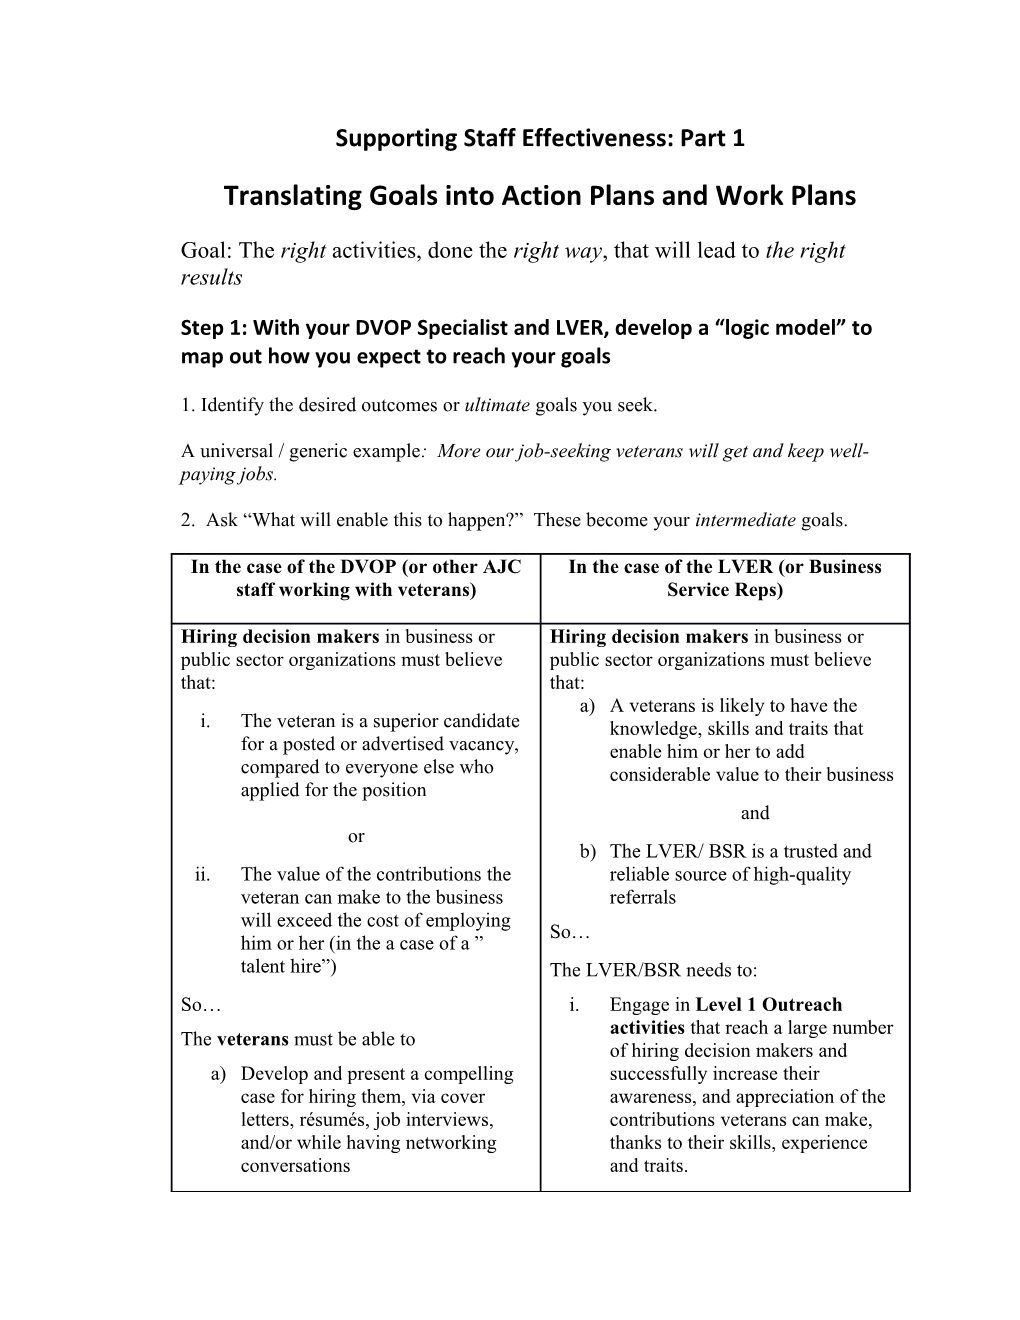 Translating Goals Into Action Plans and Work Plans